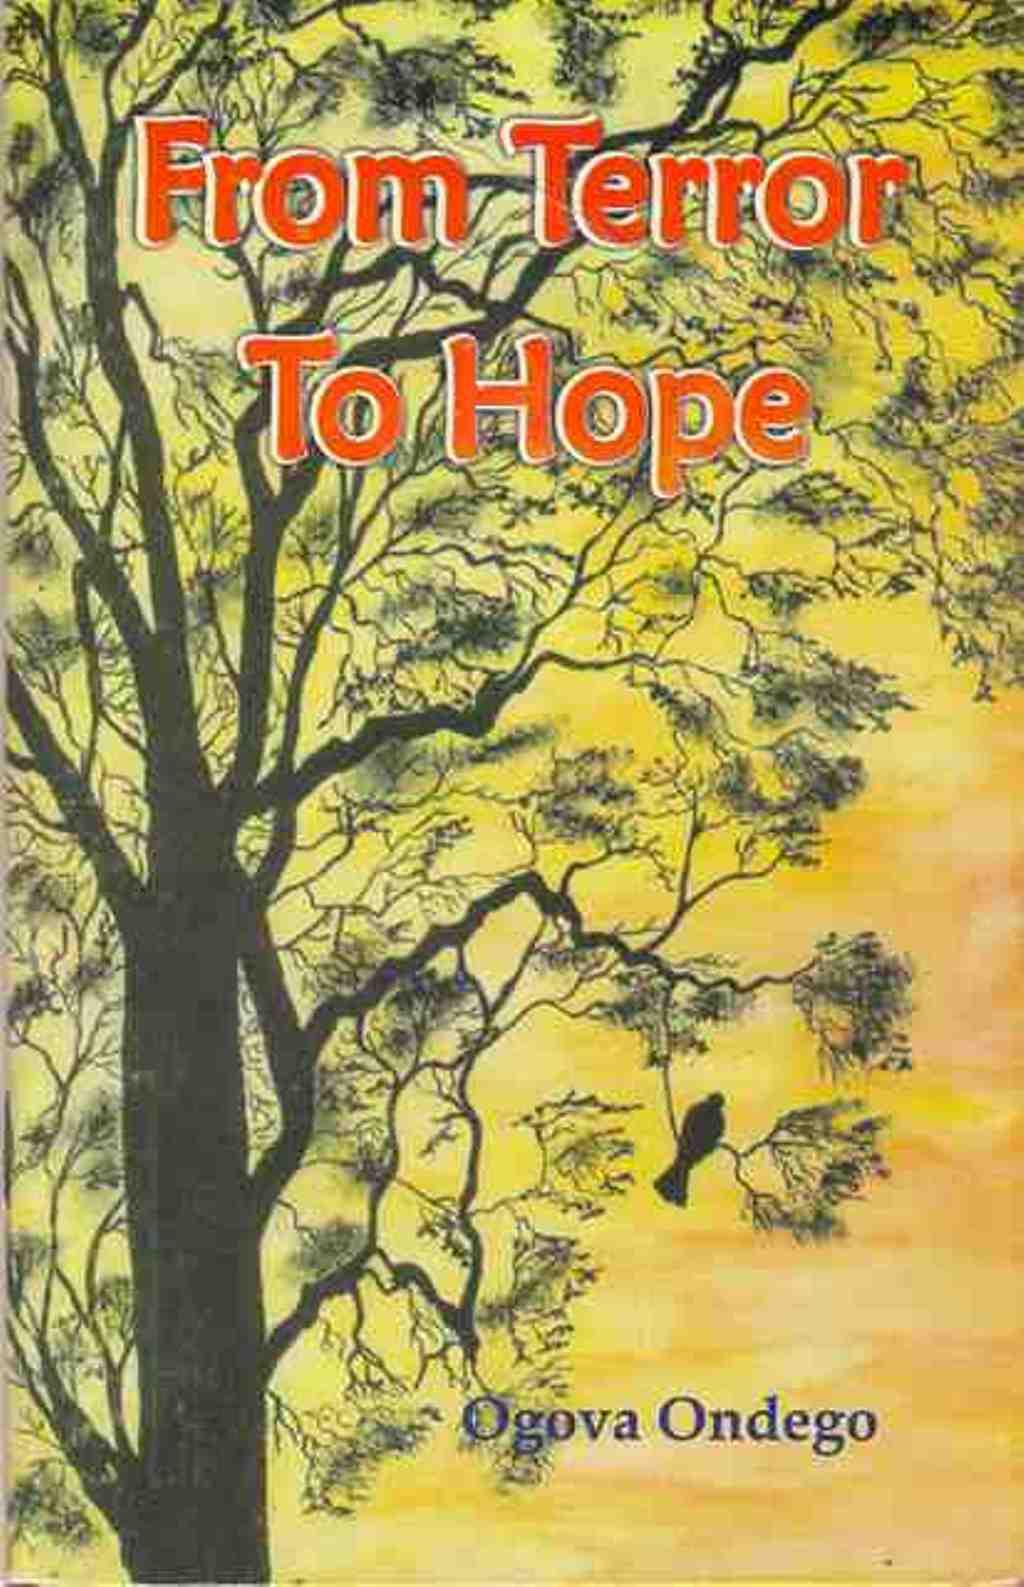 Book on Hope Amidst Terror Launched in Nairobi